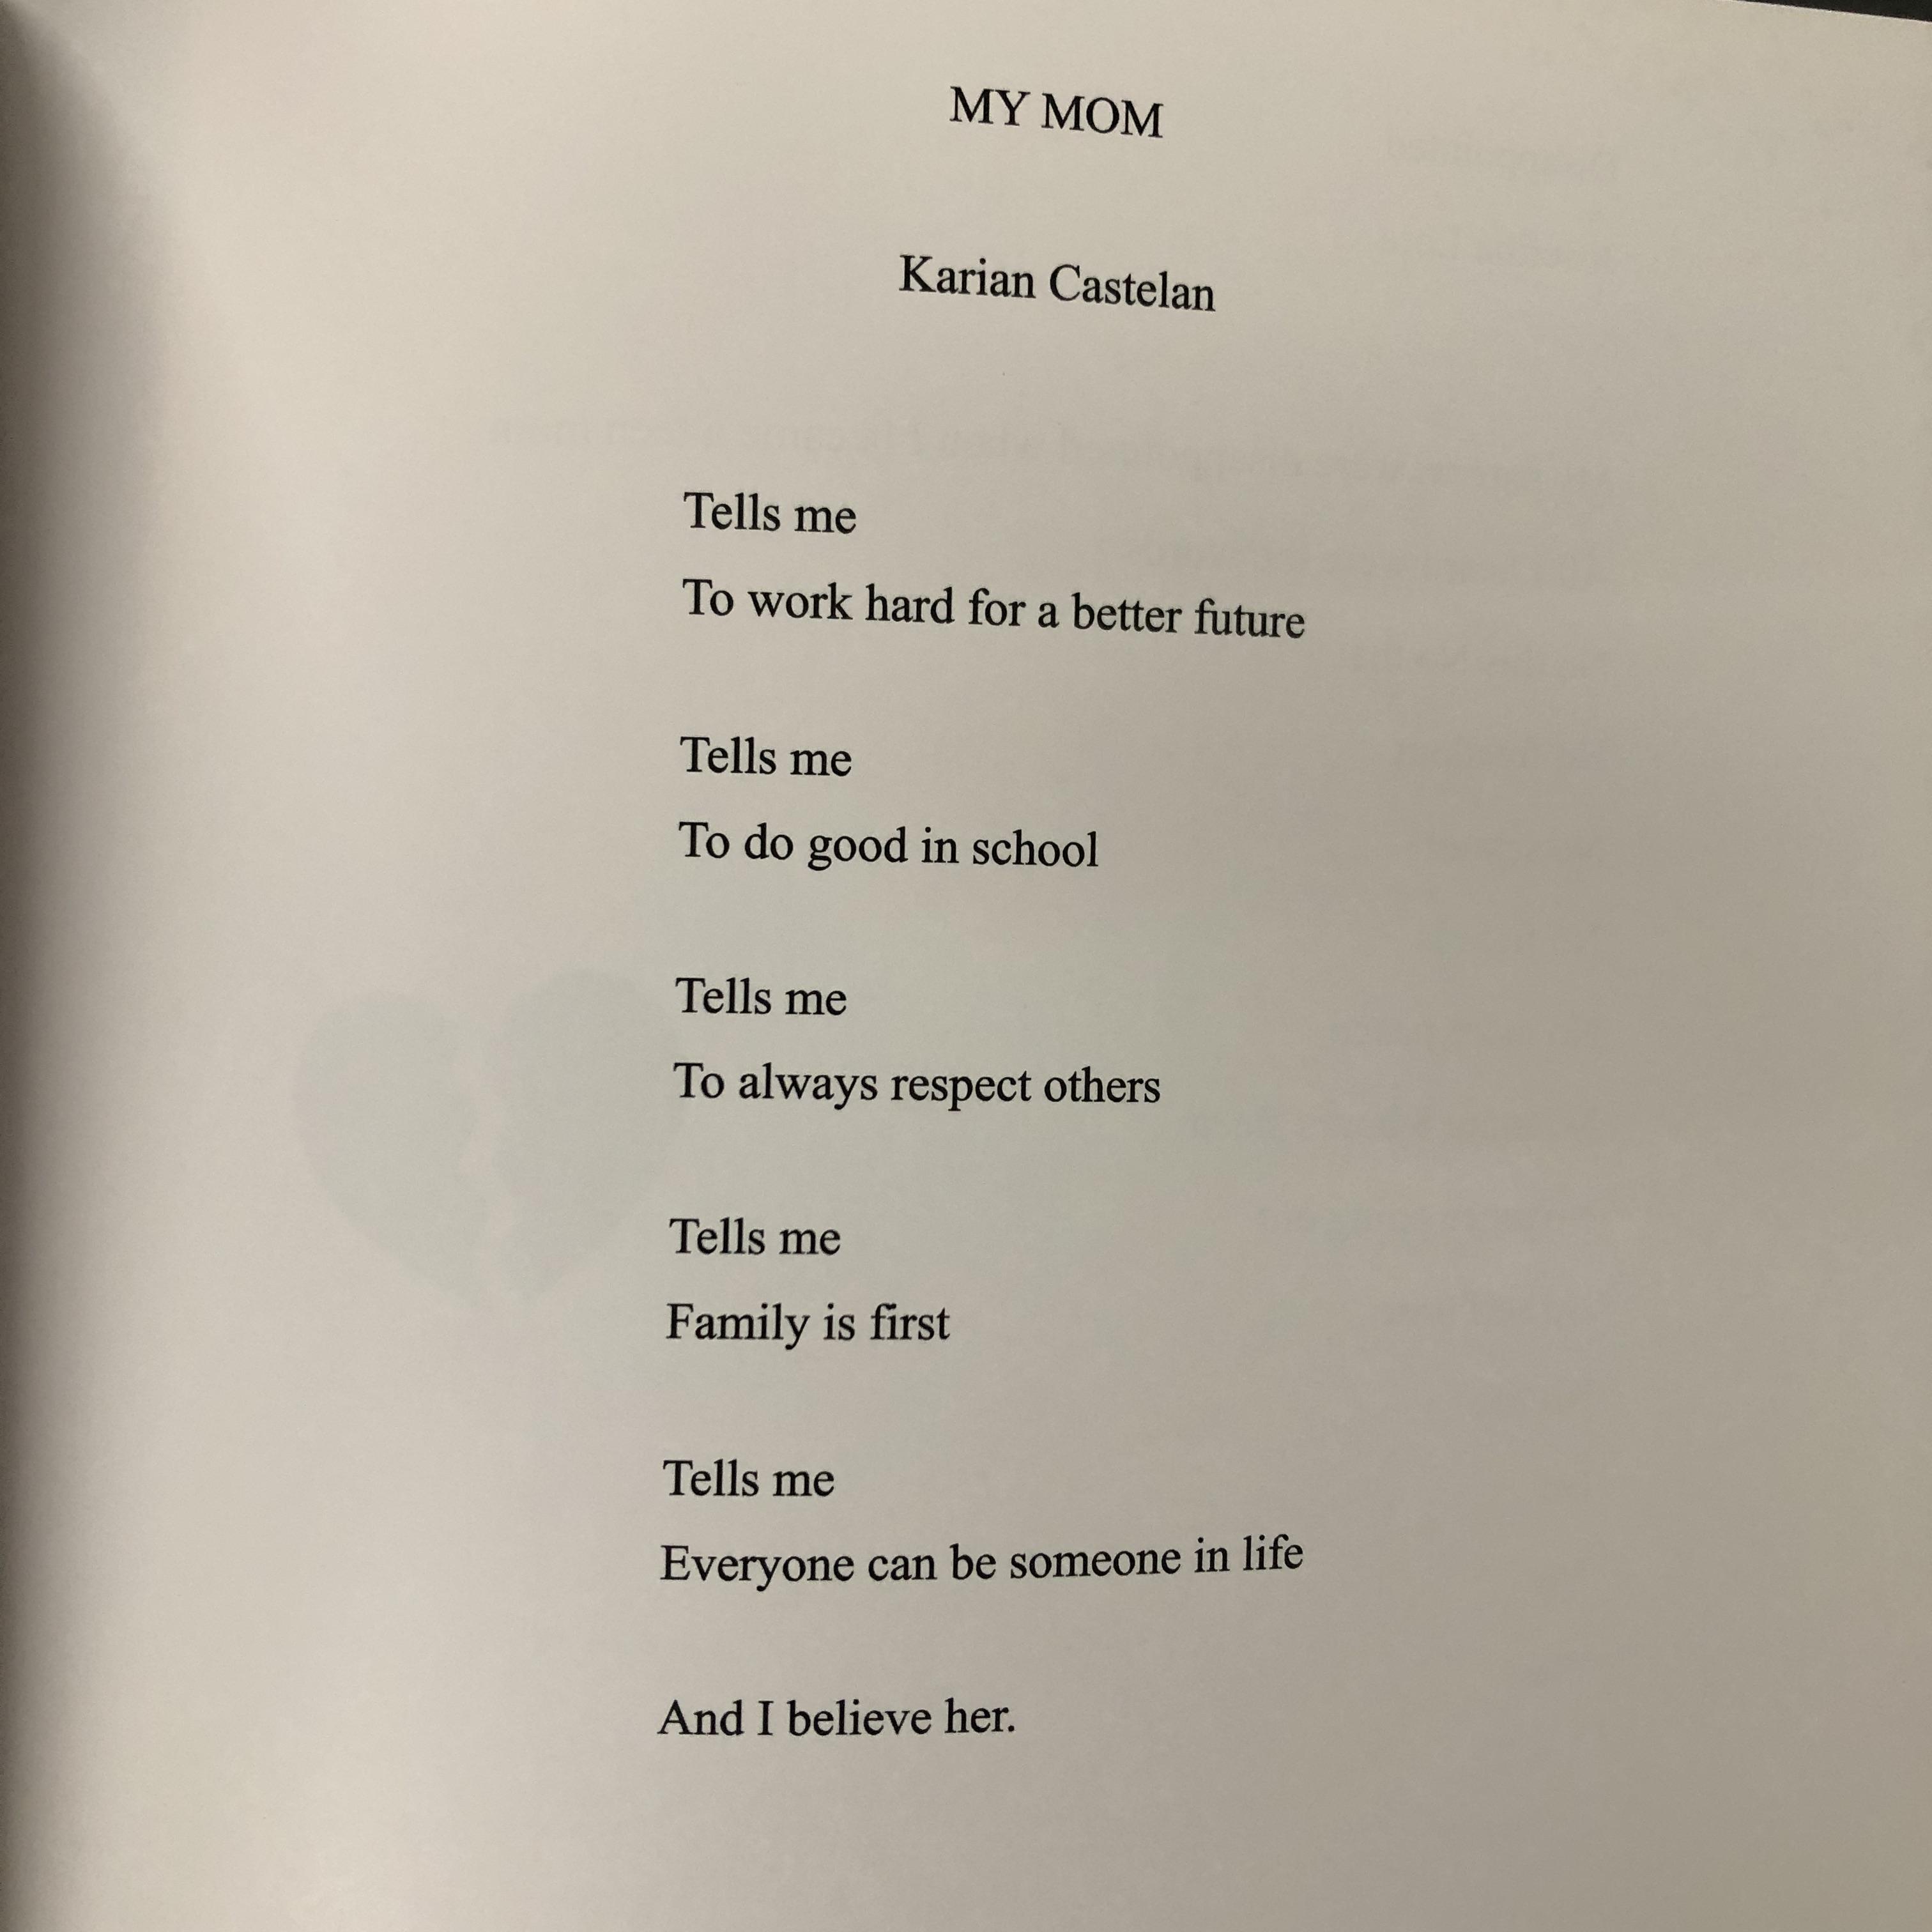 a student poem titled "My Mom" by Karian Castelan